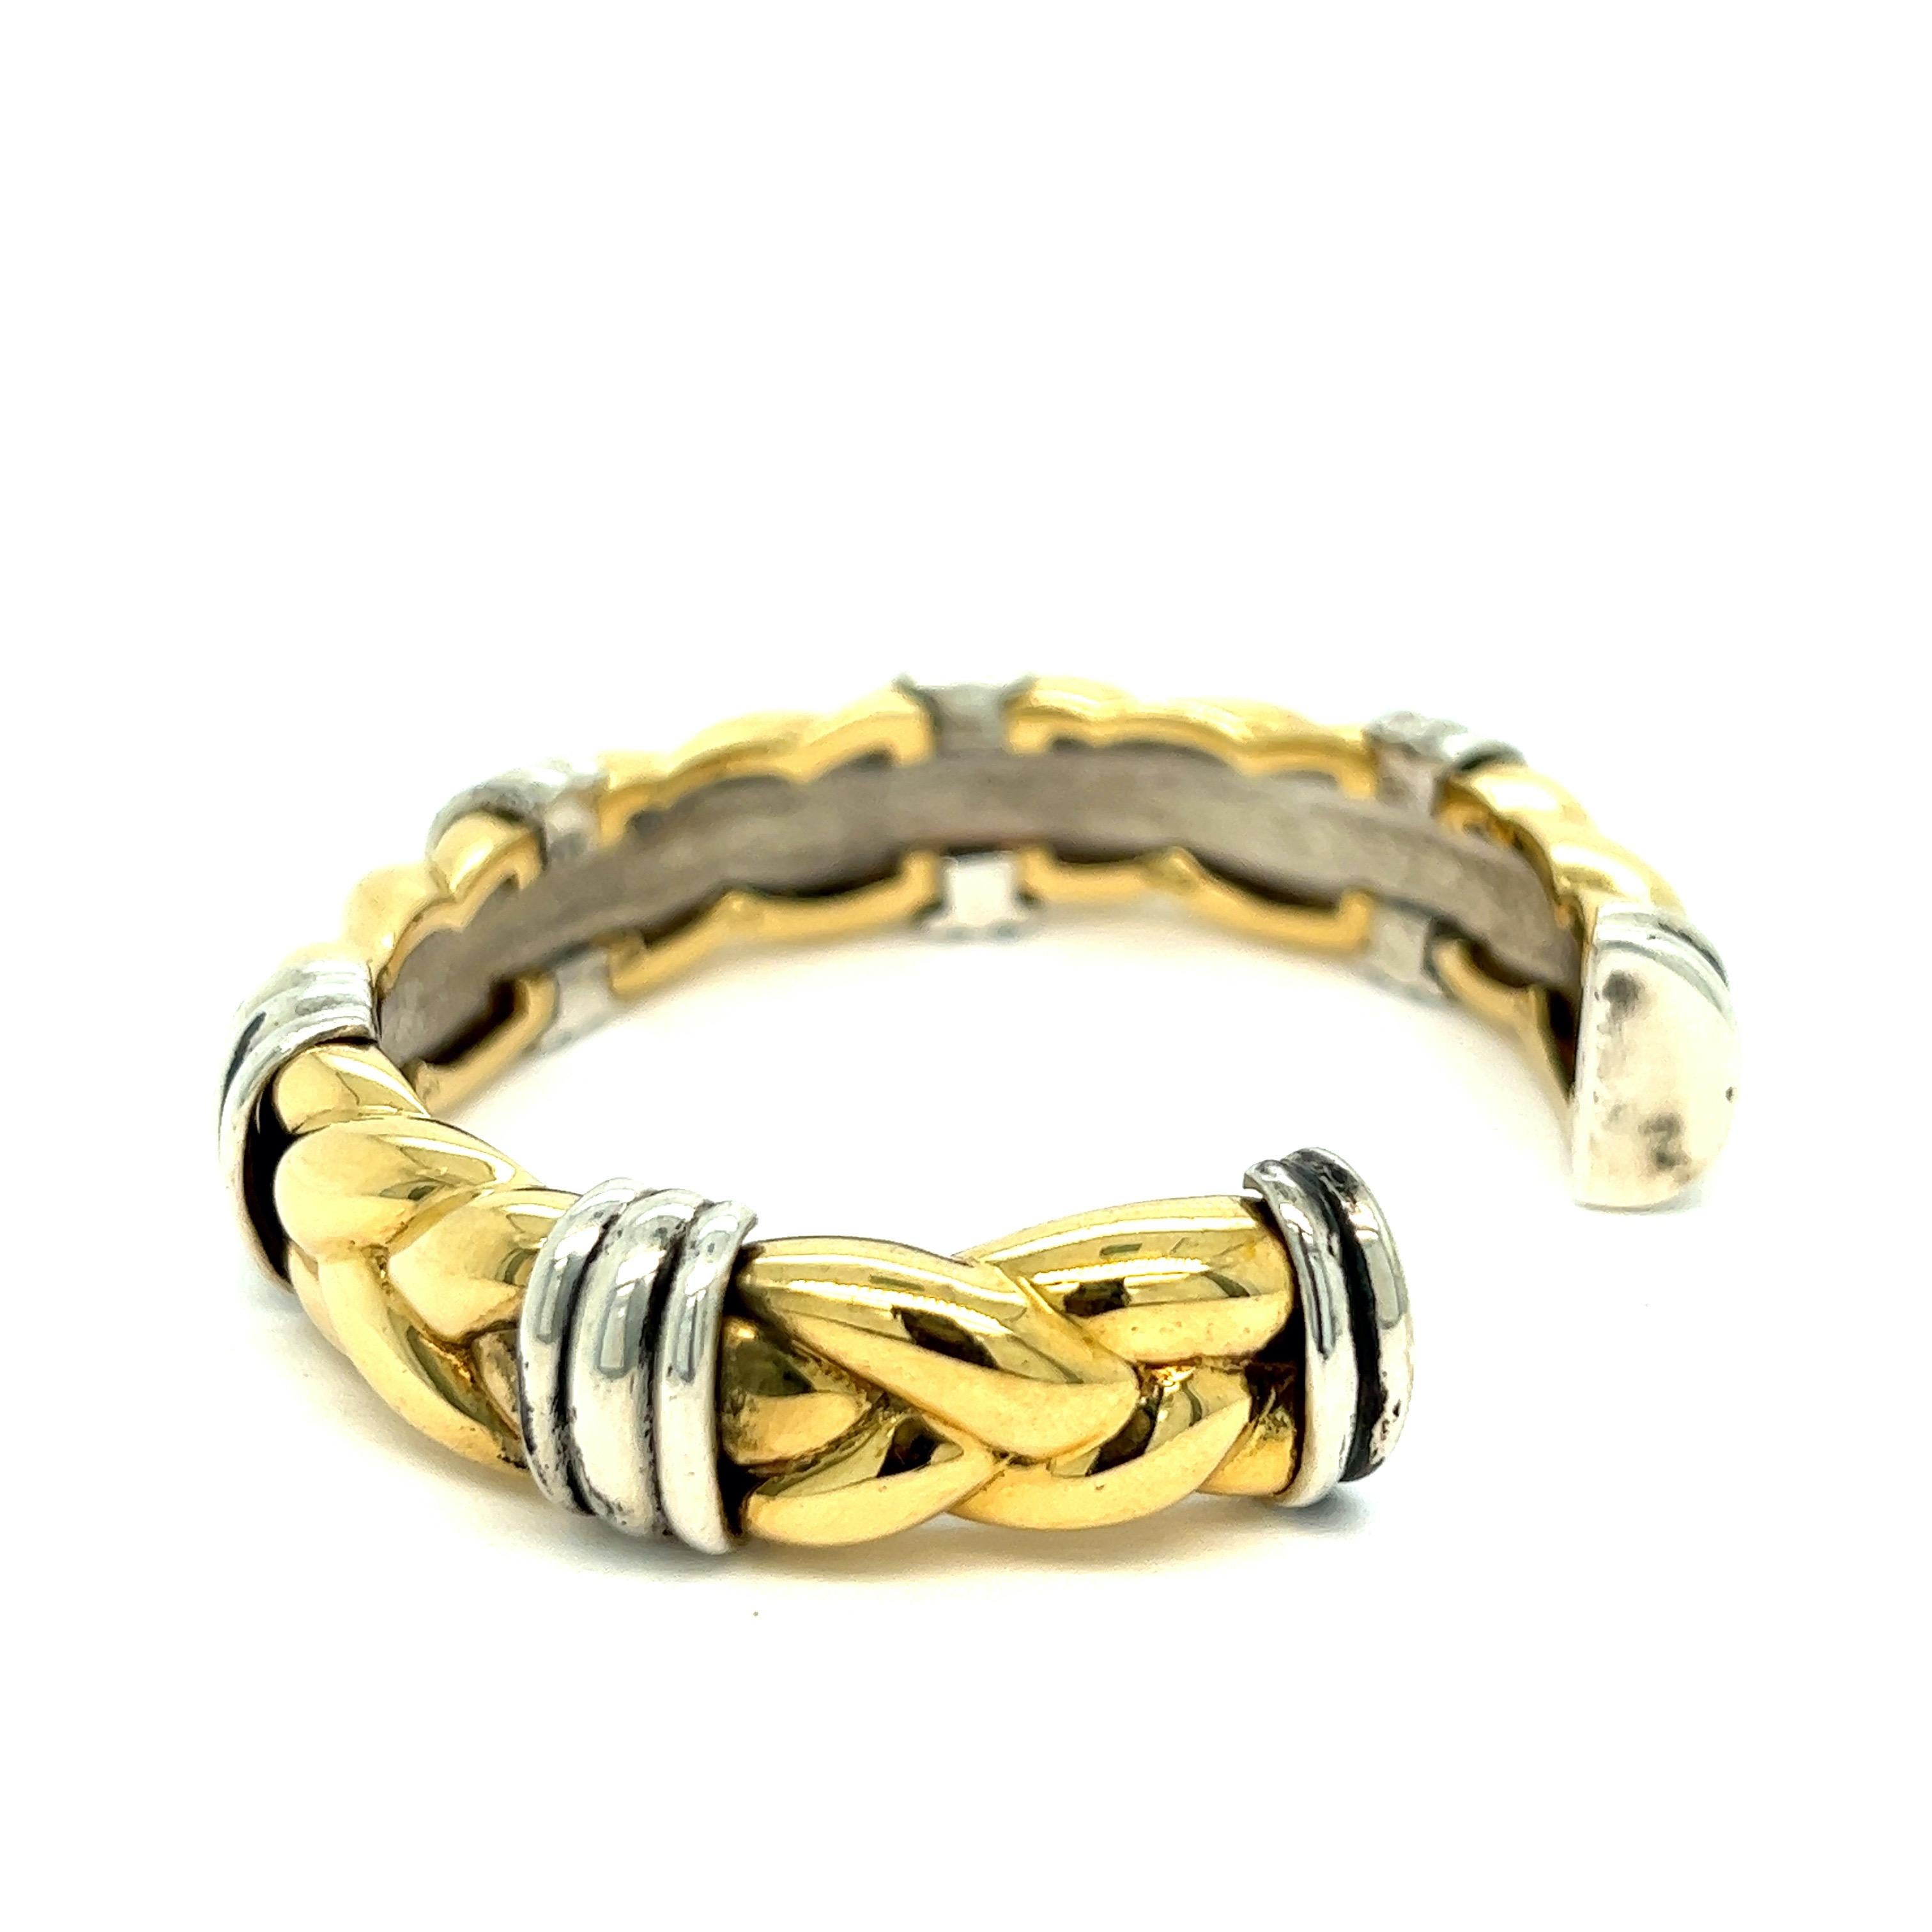 Bvlgari Braided Gold Cuff Bracelet In Good Condition For Sale In New York, NY